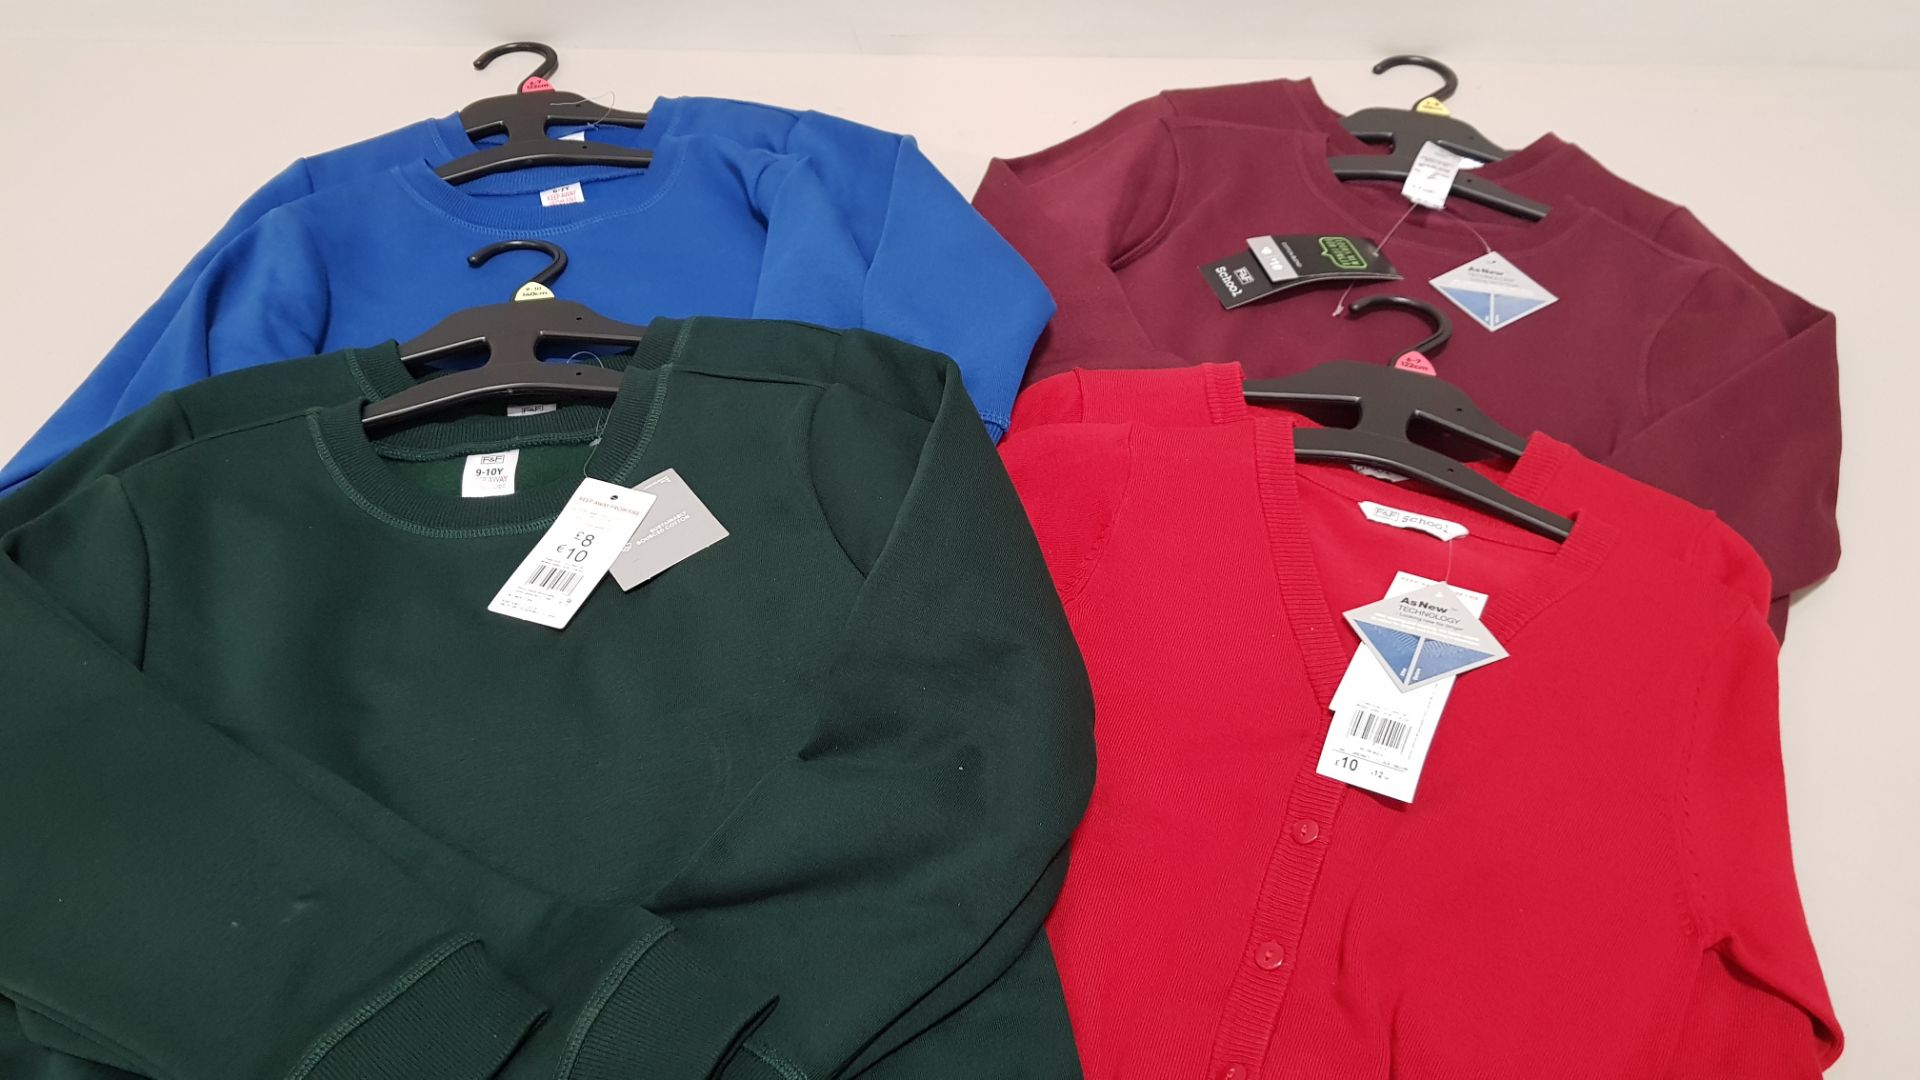 APPROX 150 X BRAND NEW ASSORTED CHILDRENS SCHOOLWEAR IE BLUE CARDIGANS AND JUMPERS - IN 5 BOXES